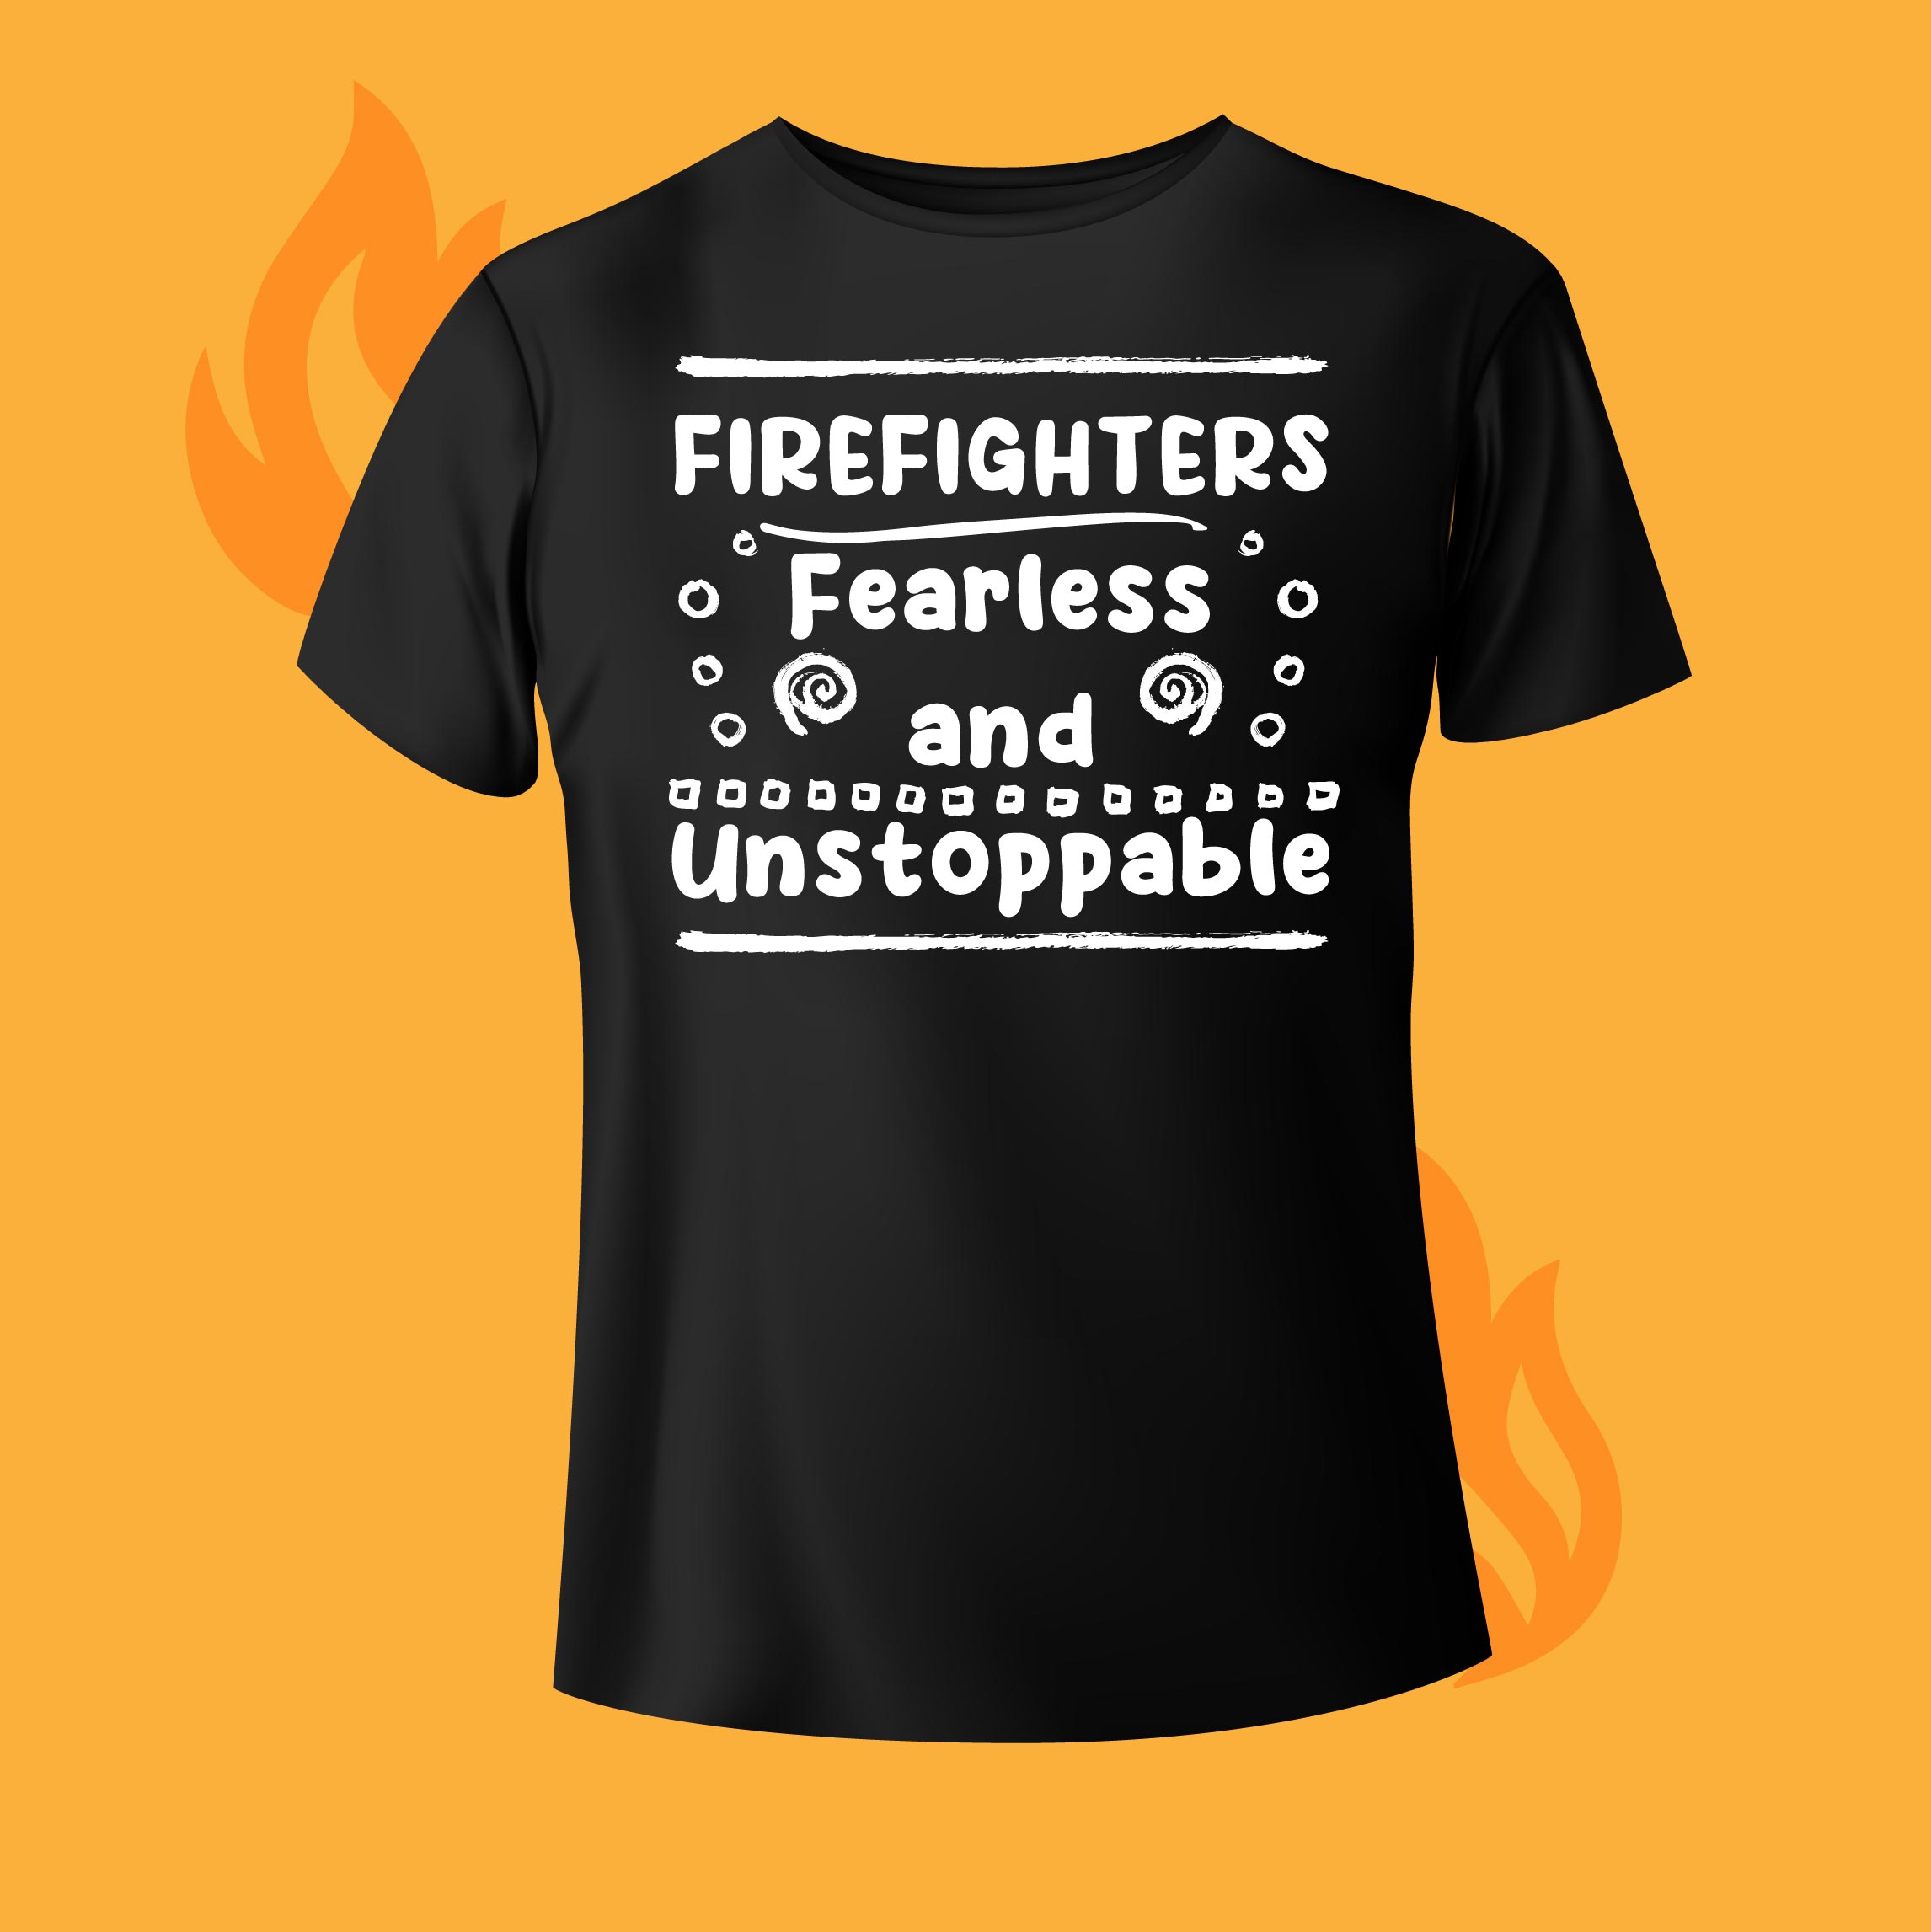 Black t - shirt that says firefighters fearless and unstoppable.